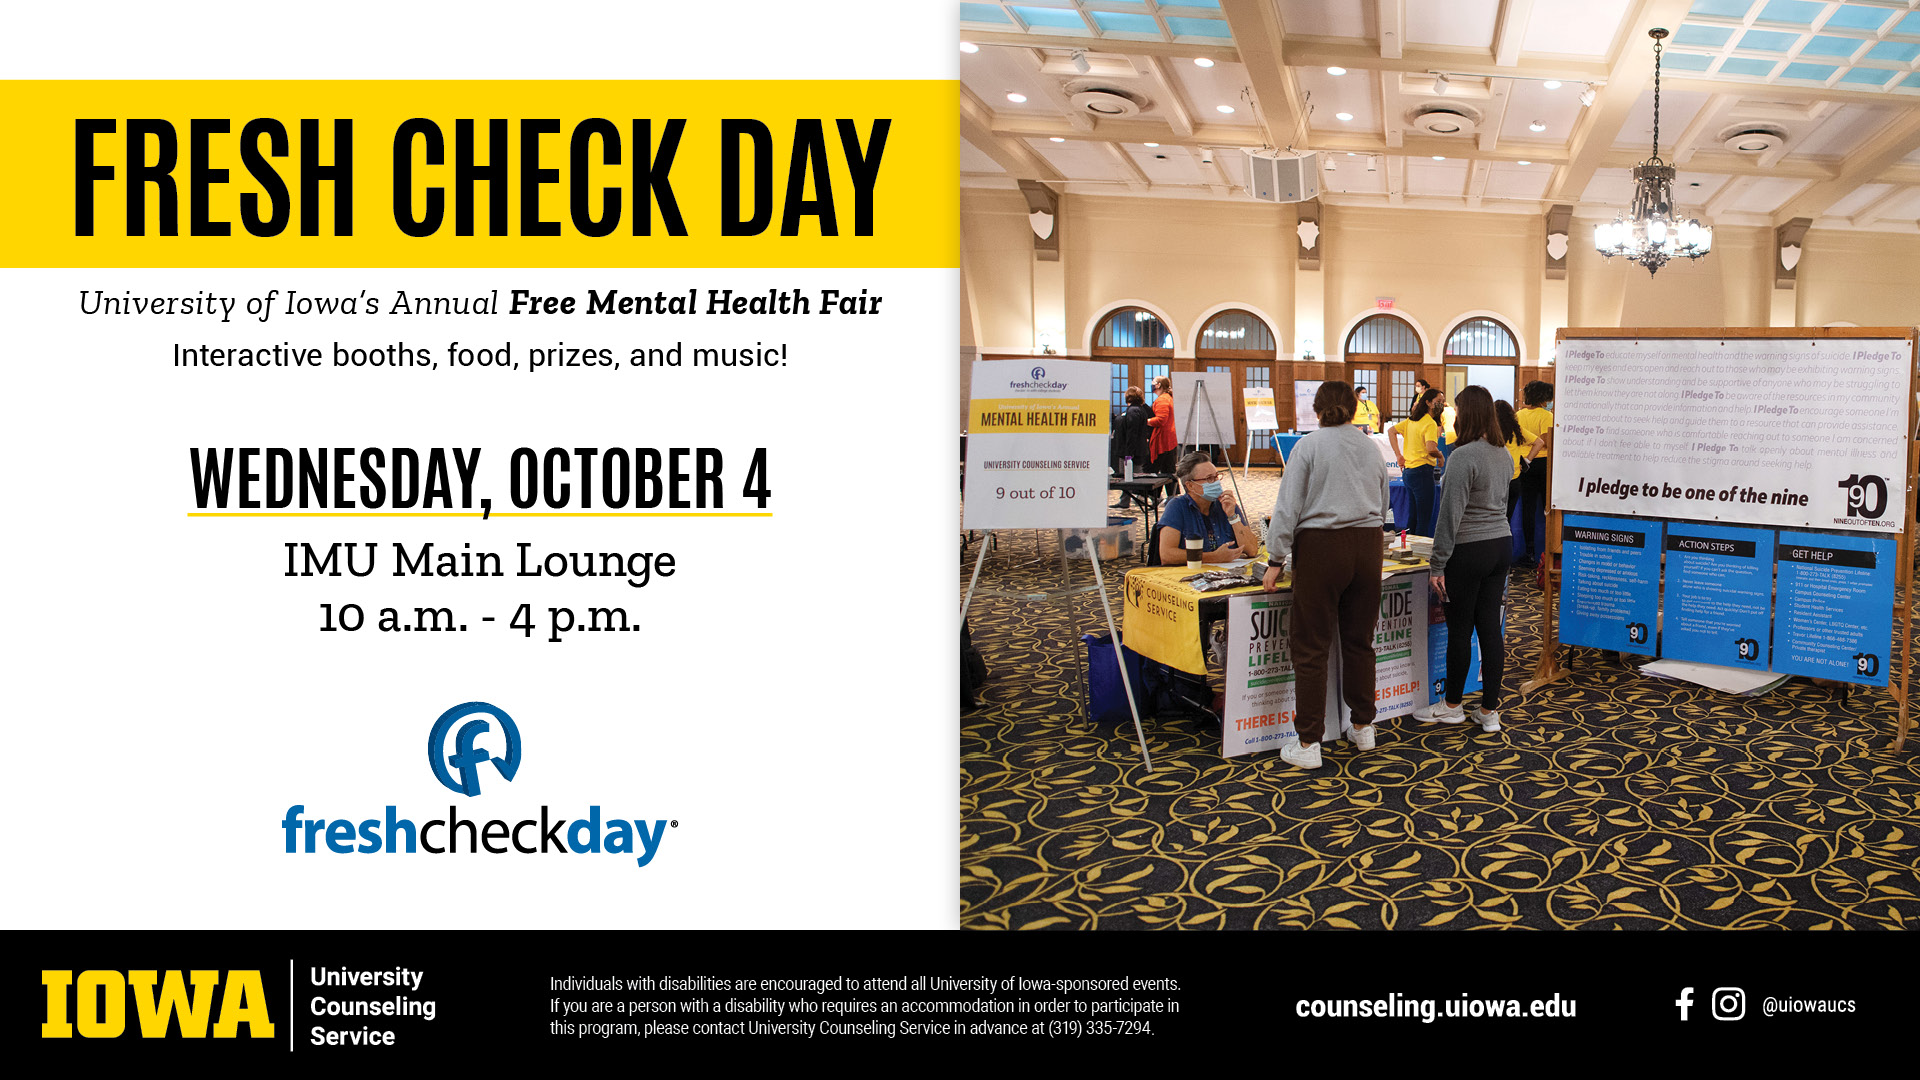 It’s time for the Annual Free Mental Health Fair again! Come to the Fresh Check Day for interactive booths, food, prizes, and music!   Wednesday, Oct 4th IMU Main Lounge 10 am – 4 pm.